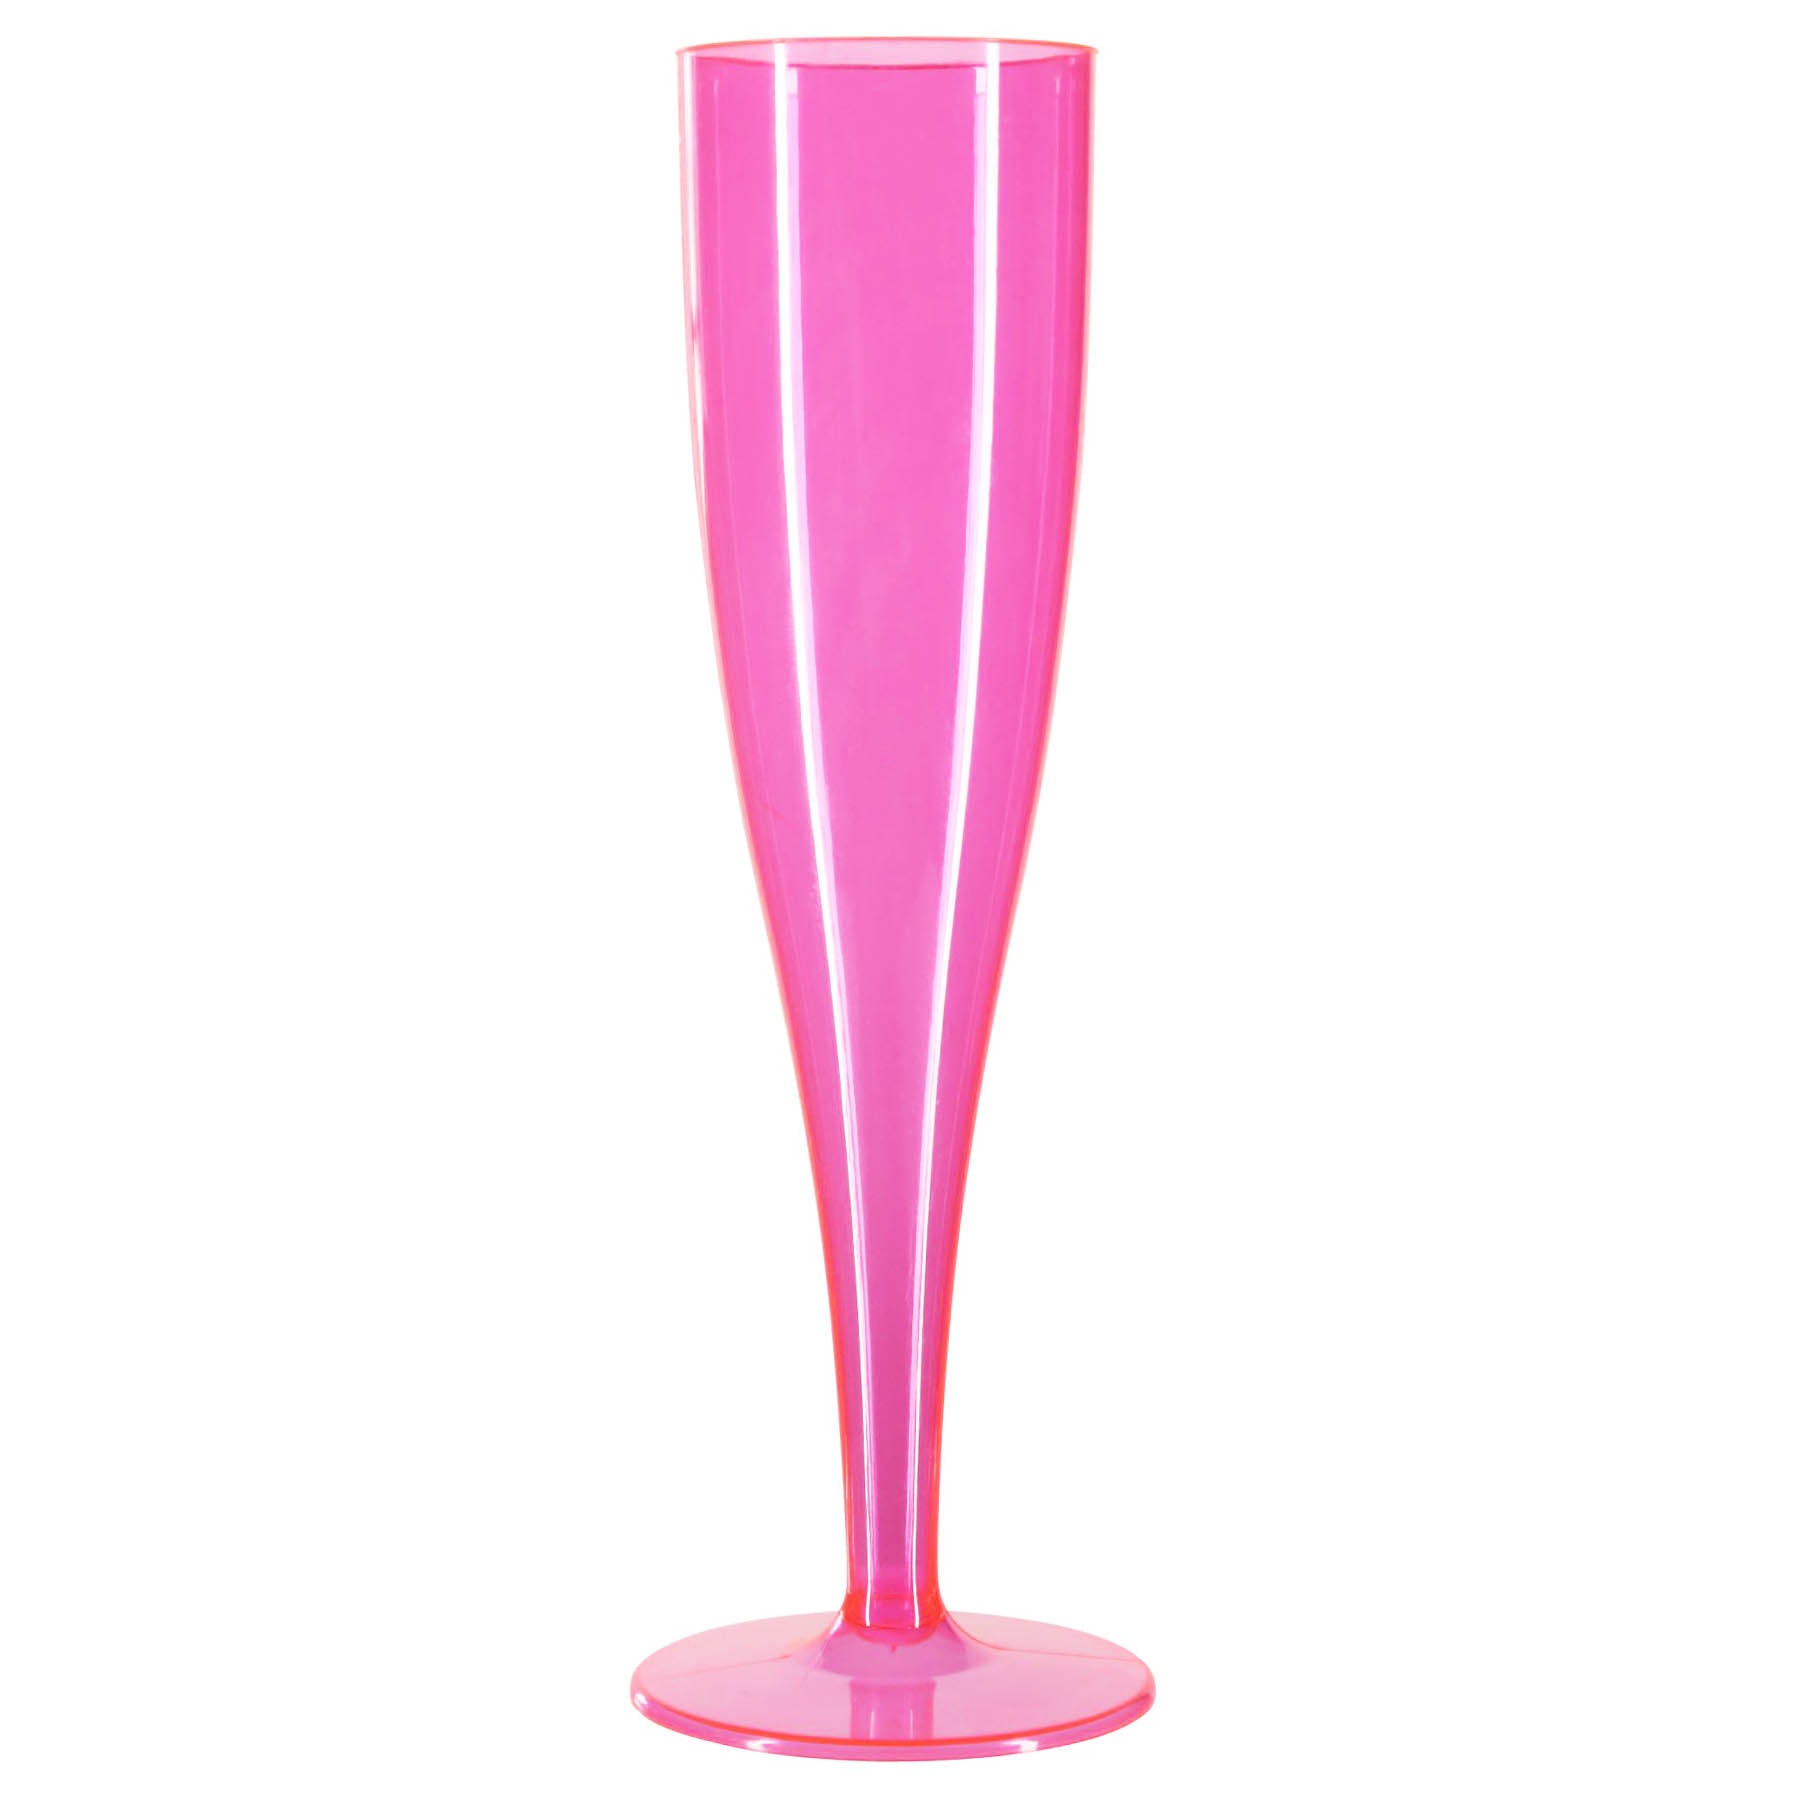 50 x Pink Prosecco Flutes 175ml 6oz Capacity Recyclable Polystyrene Material Transparent 1-Piece Sturdy Champagne Glasses BBQs Picnics-5056020107156-PCUP-CHAMPPINKx5-Product Pro-Champagne Glasses, Clear Champagne Glasses, Pink, Plastic Flutes, Prosecco Flutes